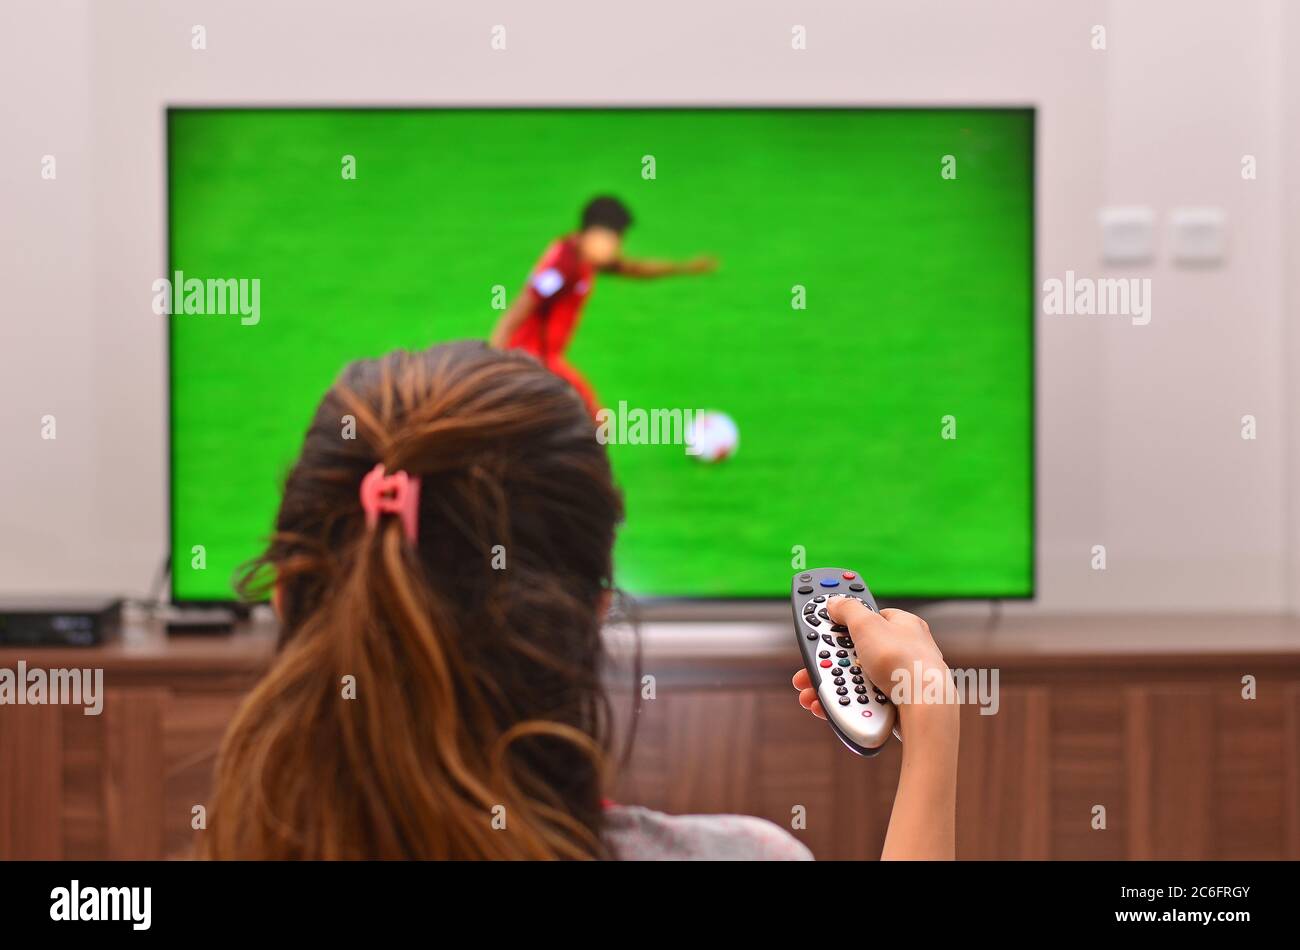 Women watching a football match on tv and use remote controller Stock Photo 